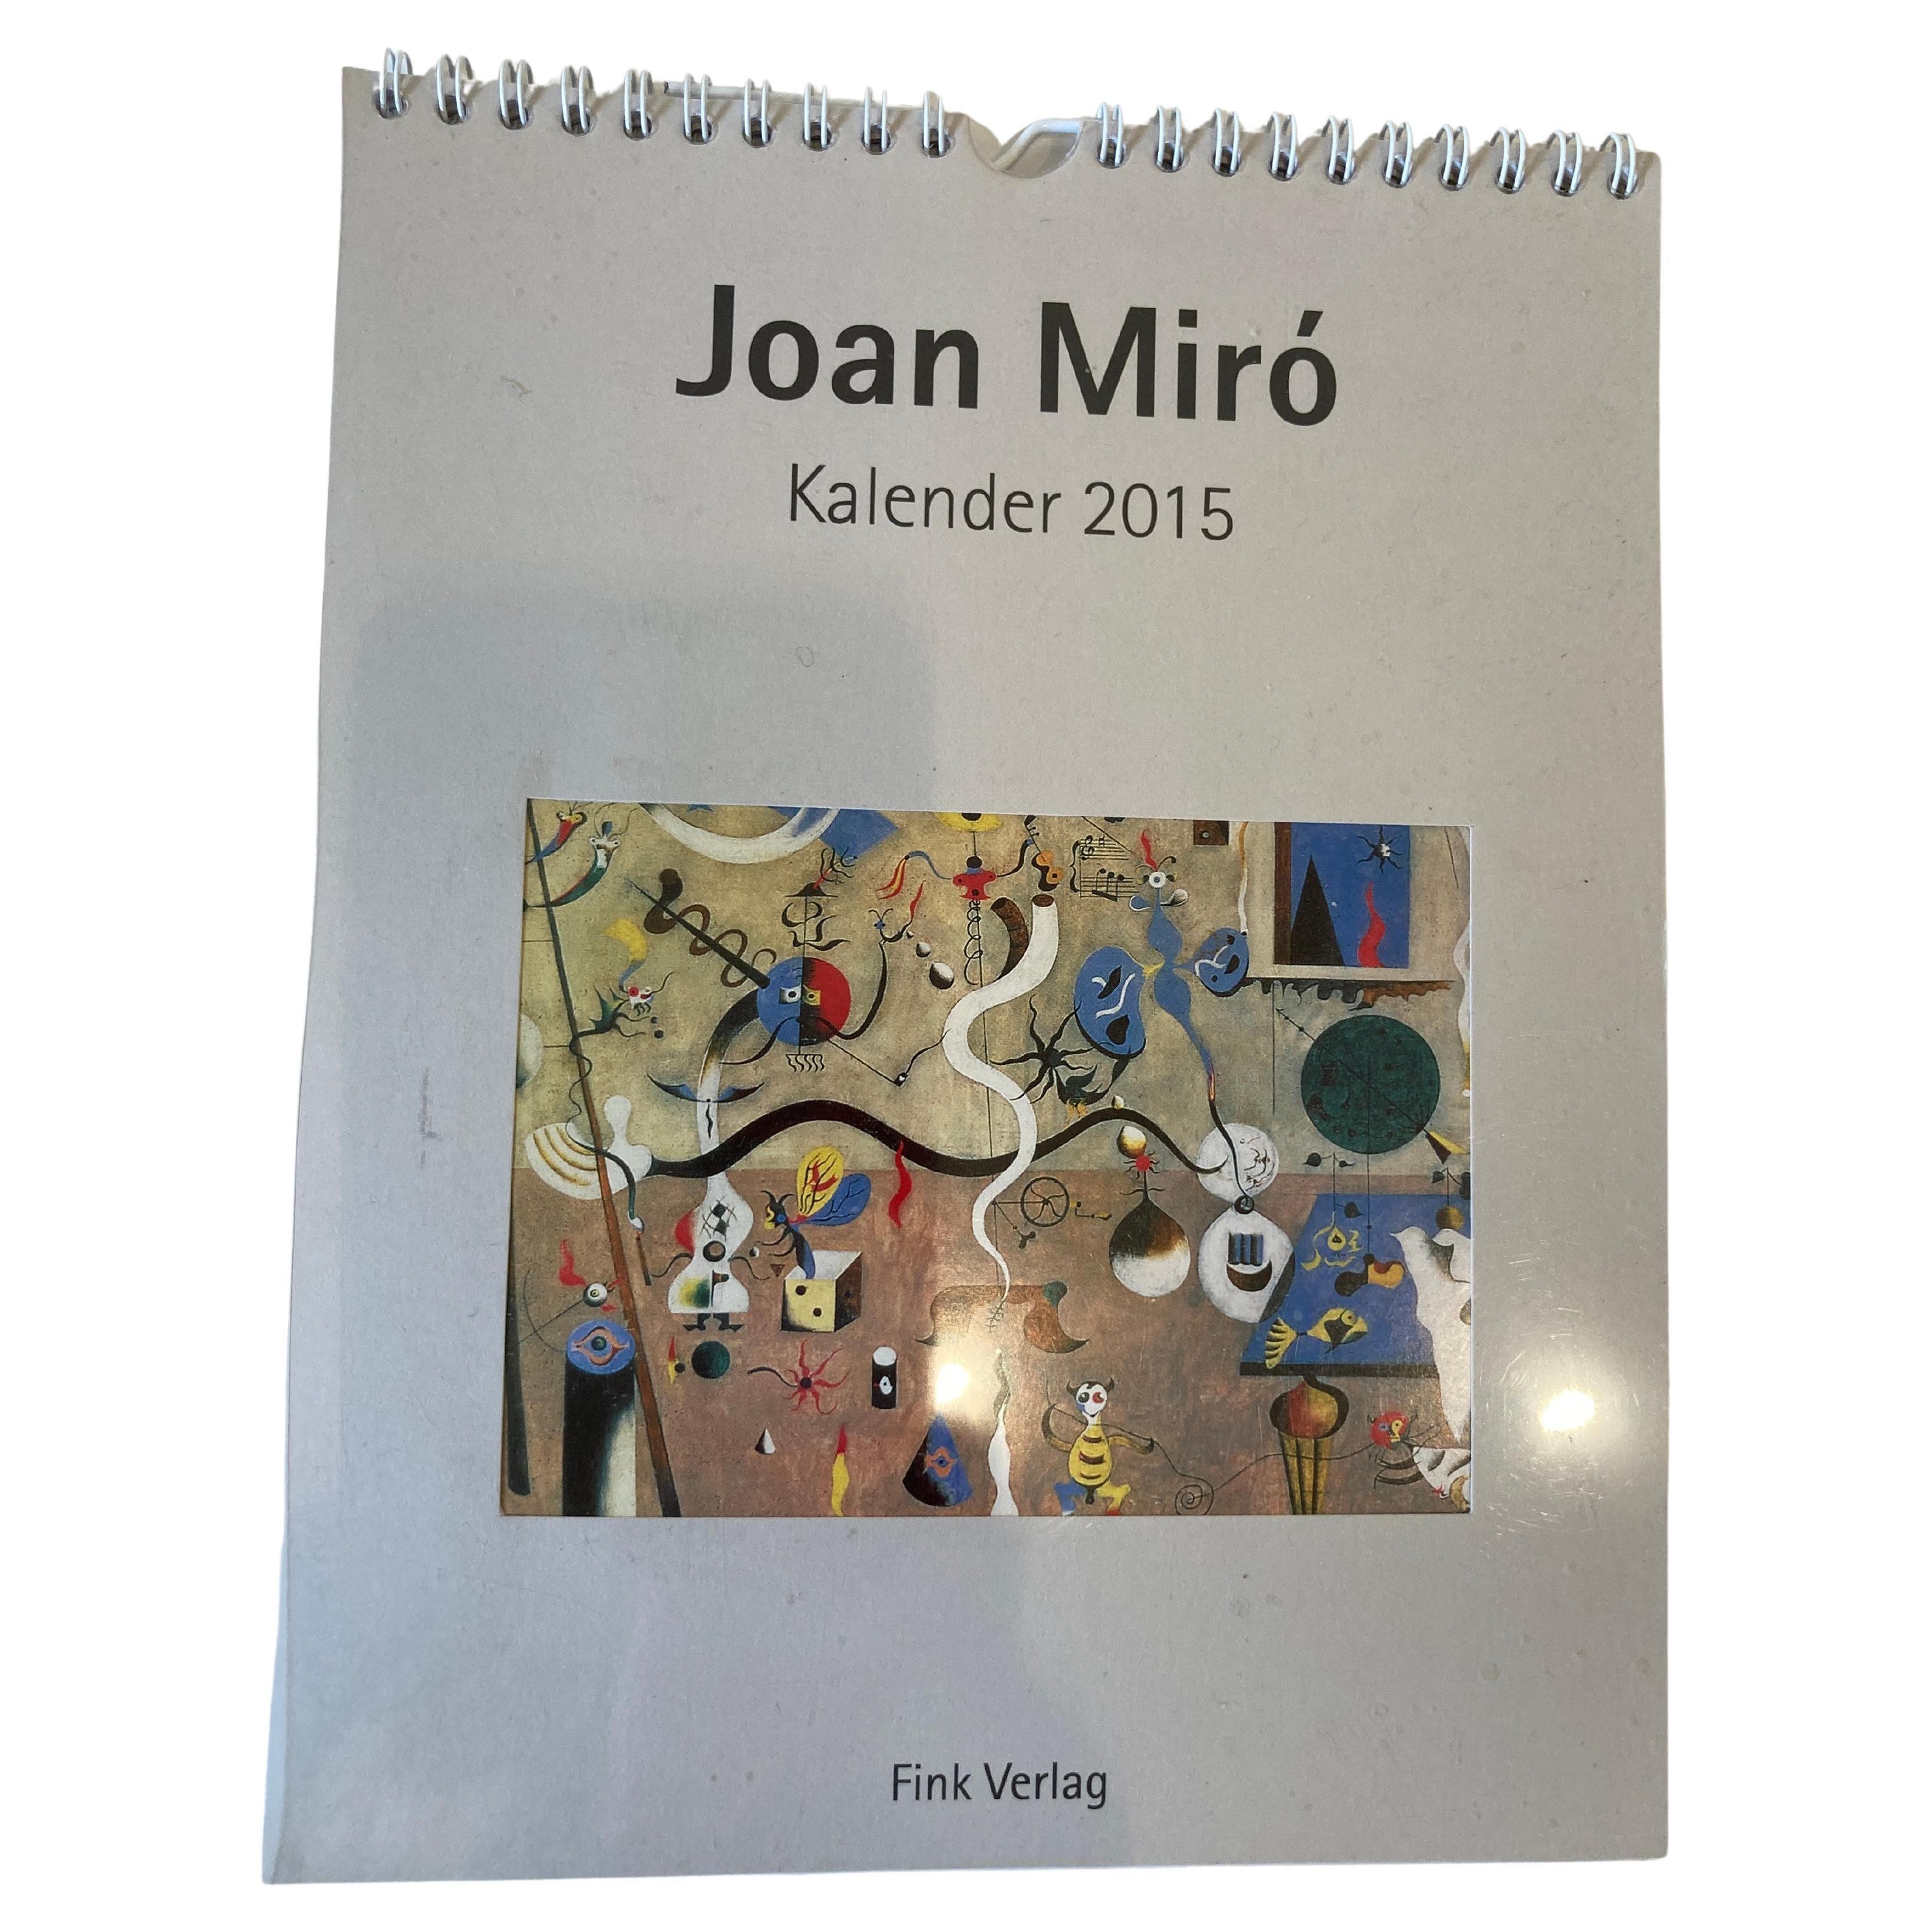 Joan Miro Kalender 2015,
Beautiful artistic calender after the painting of Joan Miro.
This is a beautiful collectible booklet.
 